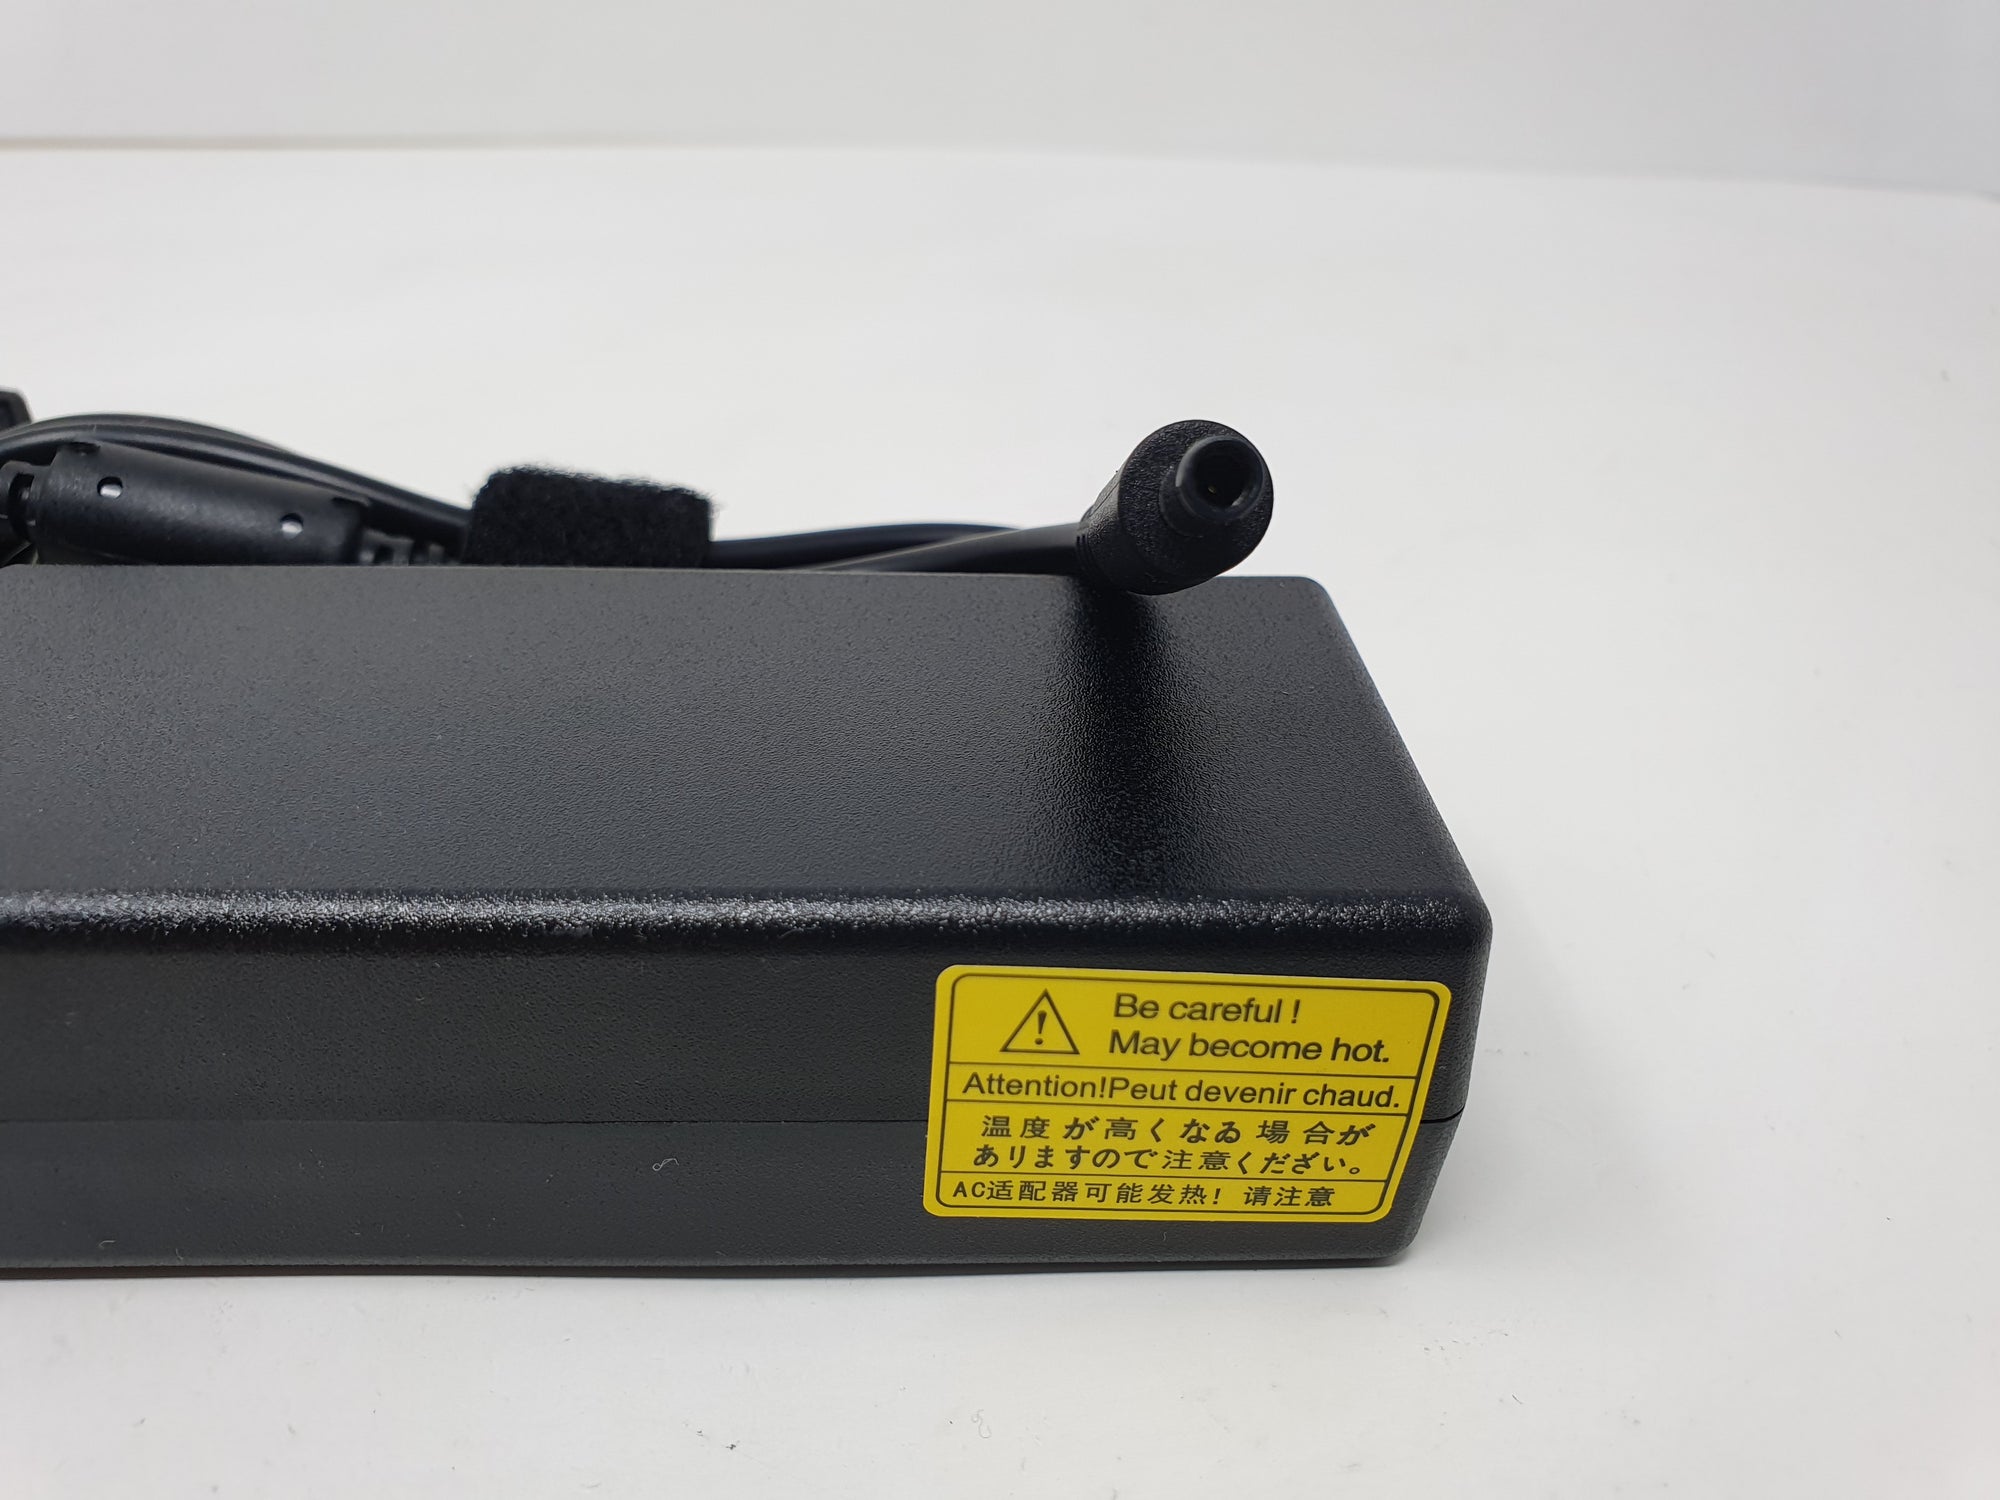 DELL Laptop Charger Power Adaptor